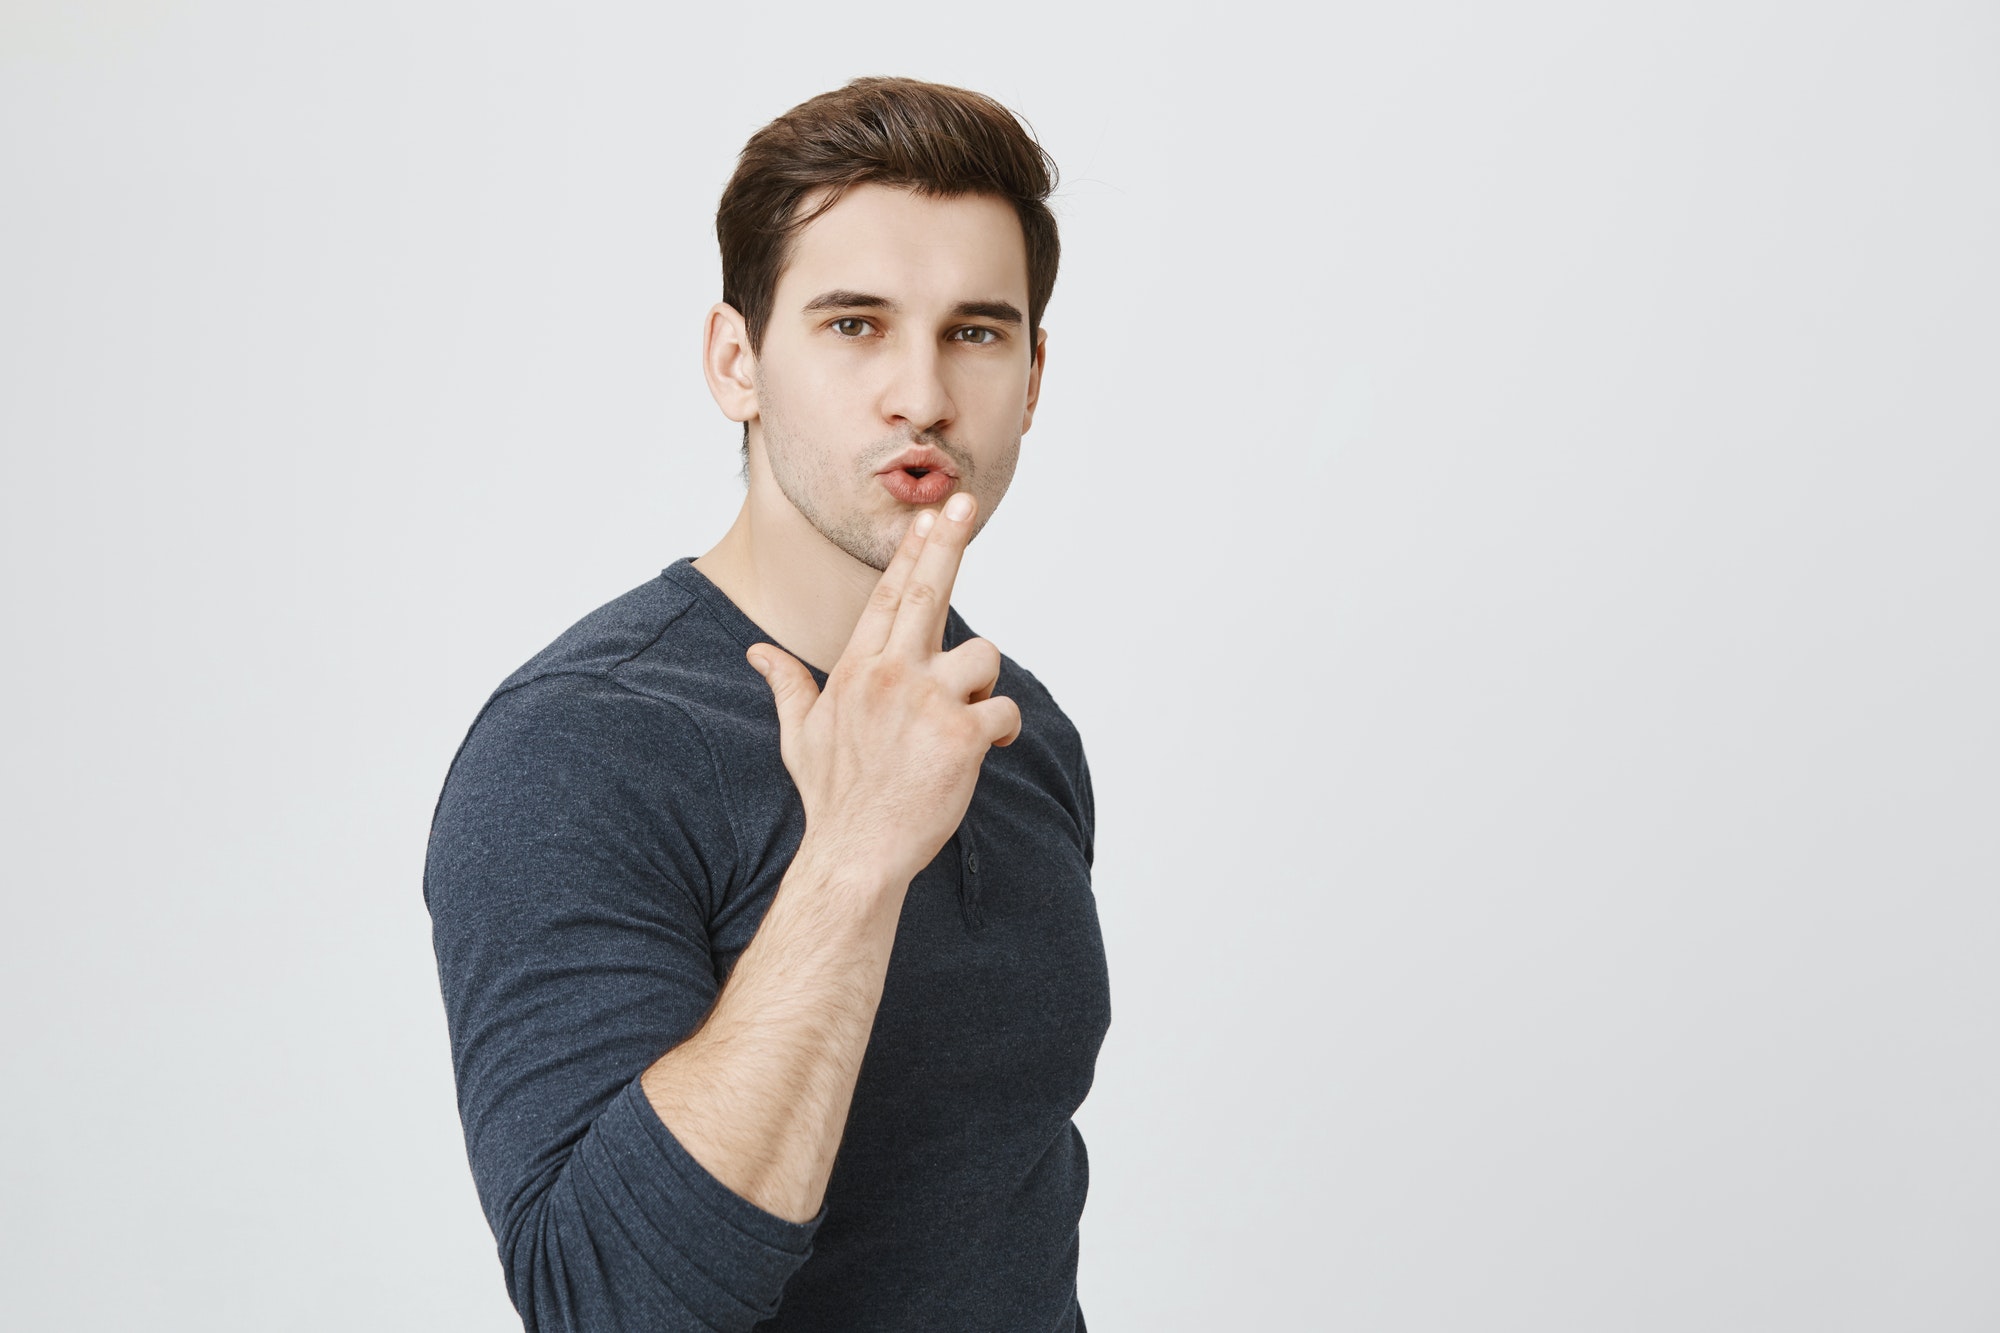 Horizontal portrait of confident young man makes shooting gesture, ready to reach great success